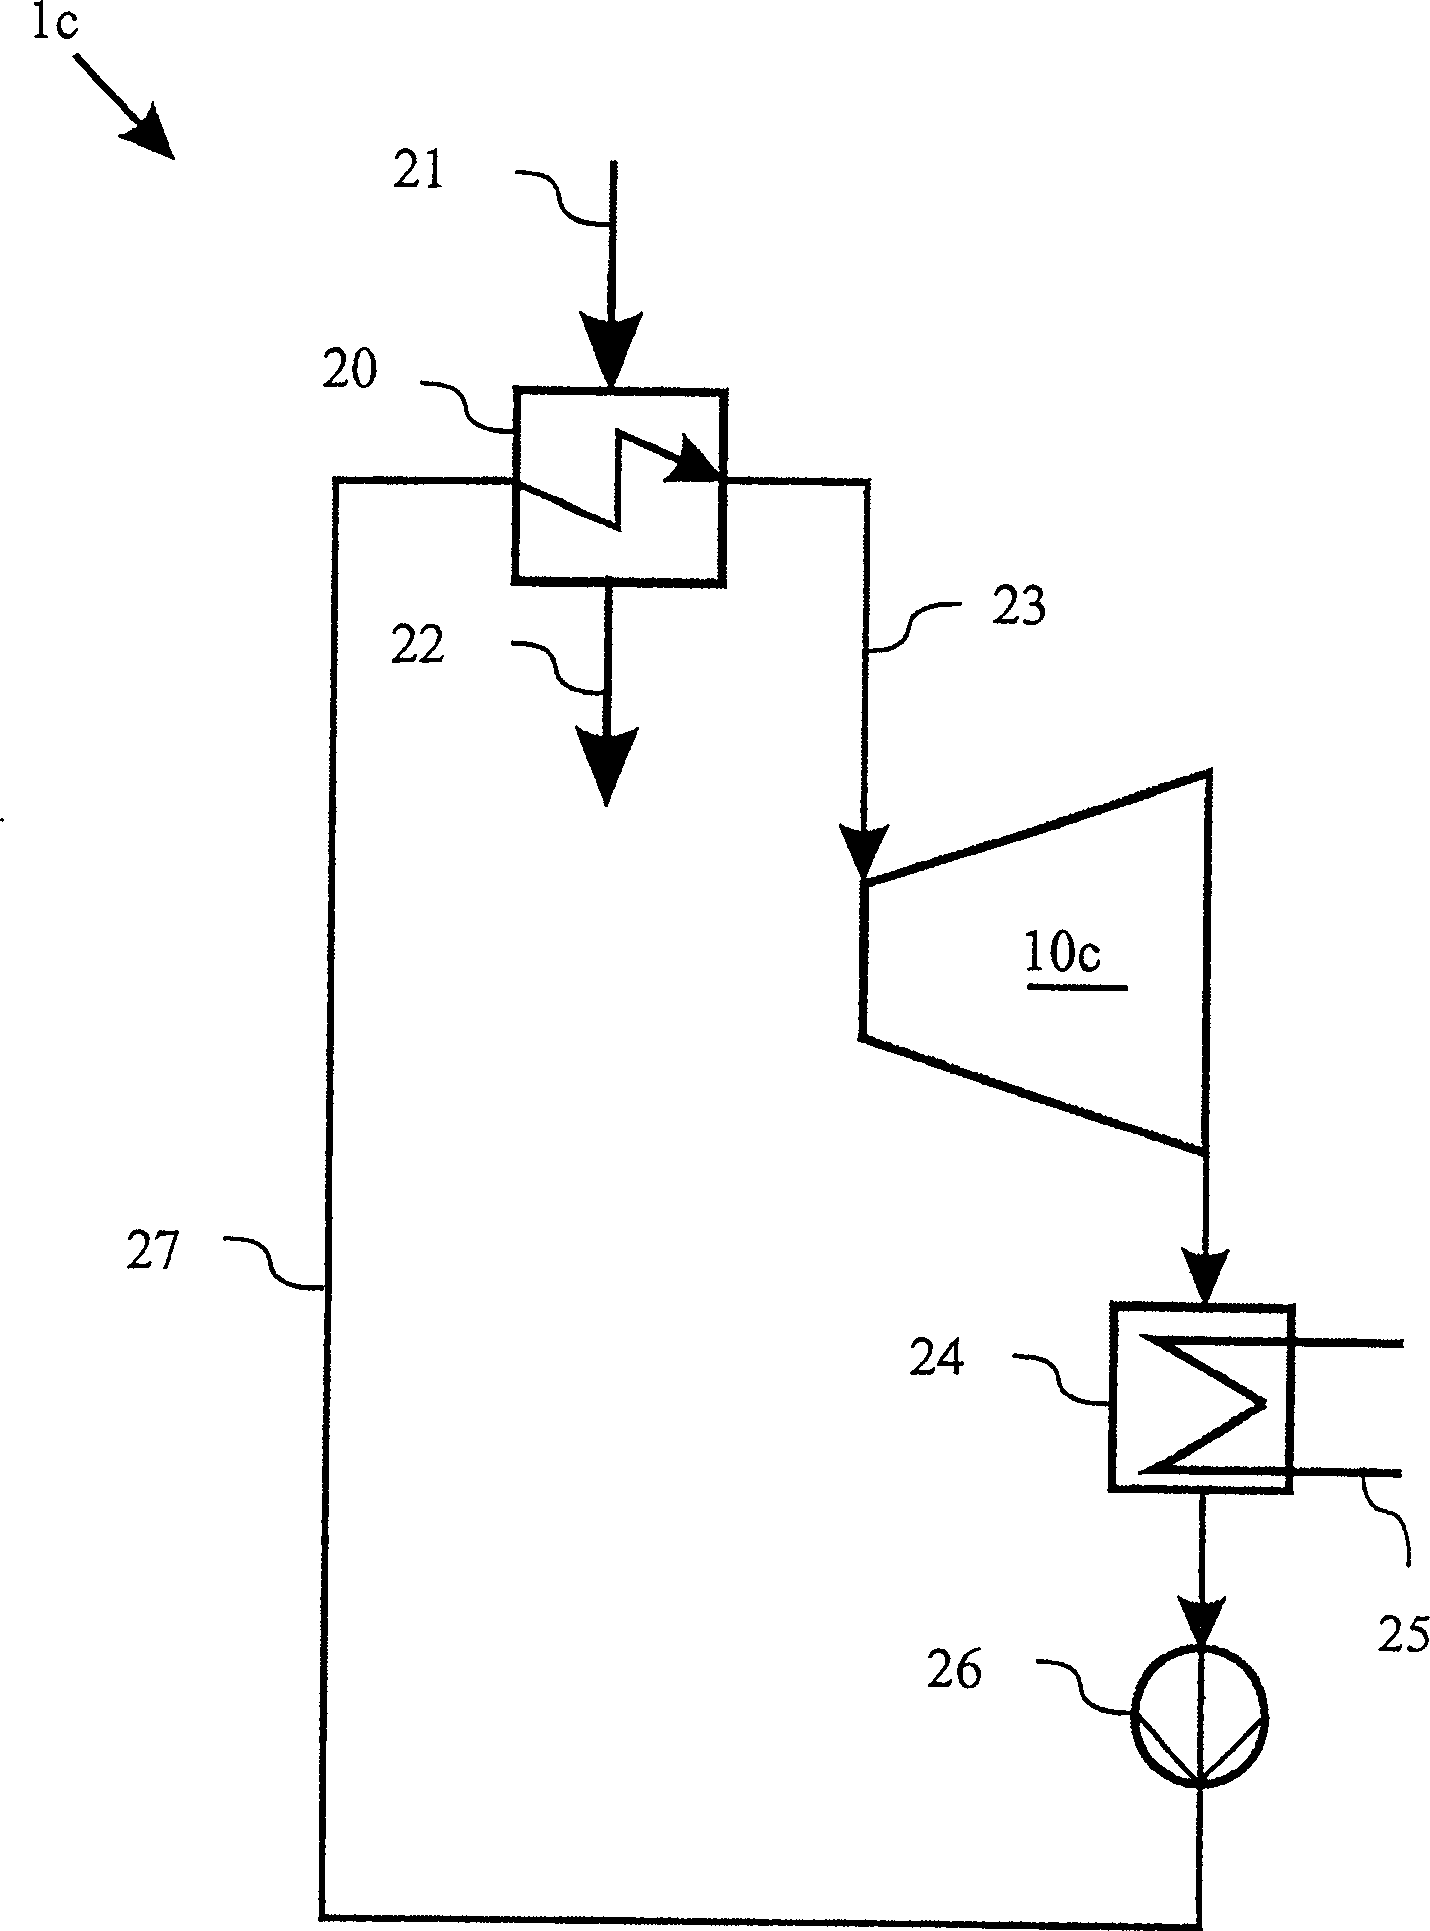 Generator system and method for operating such a system